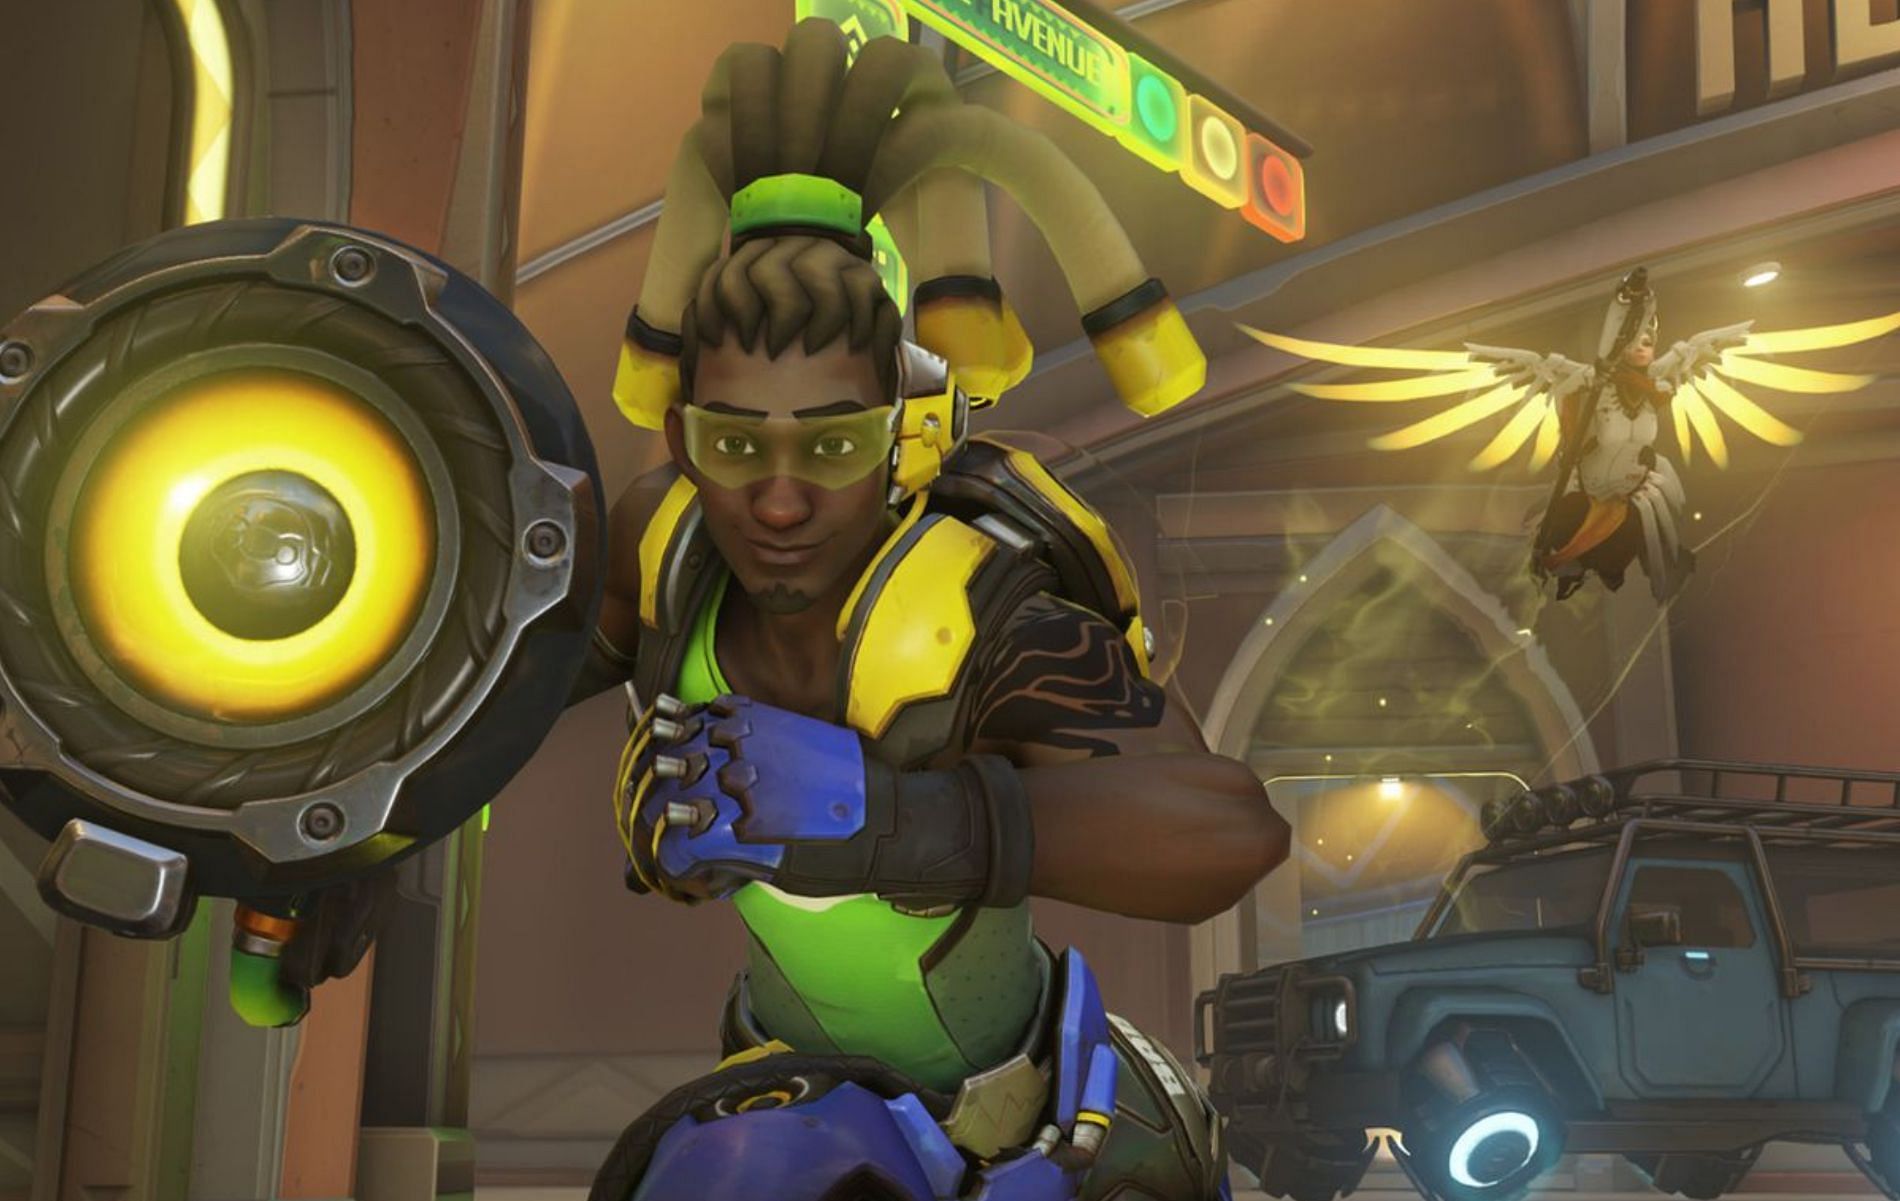 Lucio (front) can ride along walls and Mercy (behind) can fly (Image via Blizzard Entertainment)